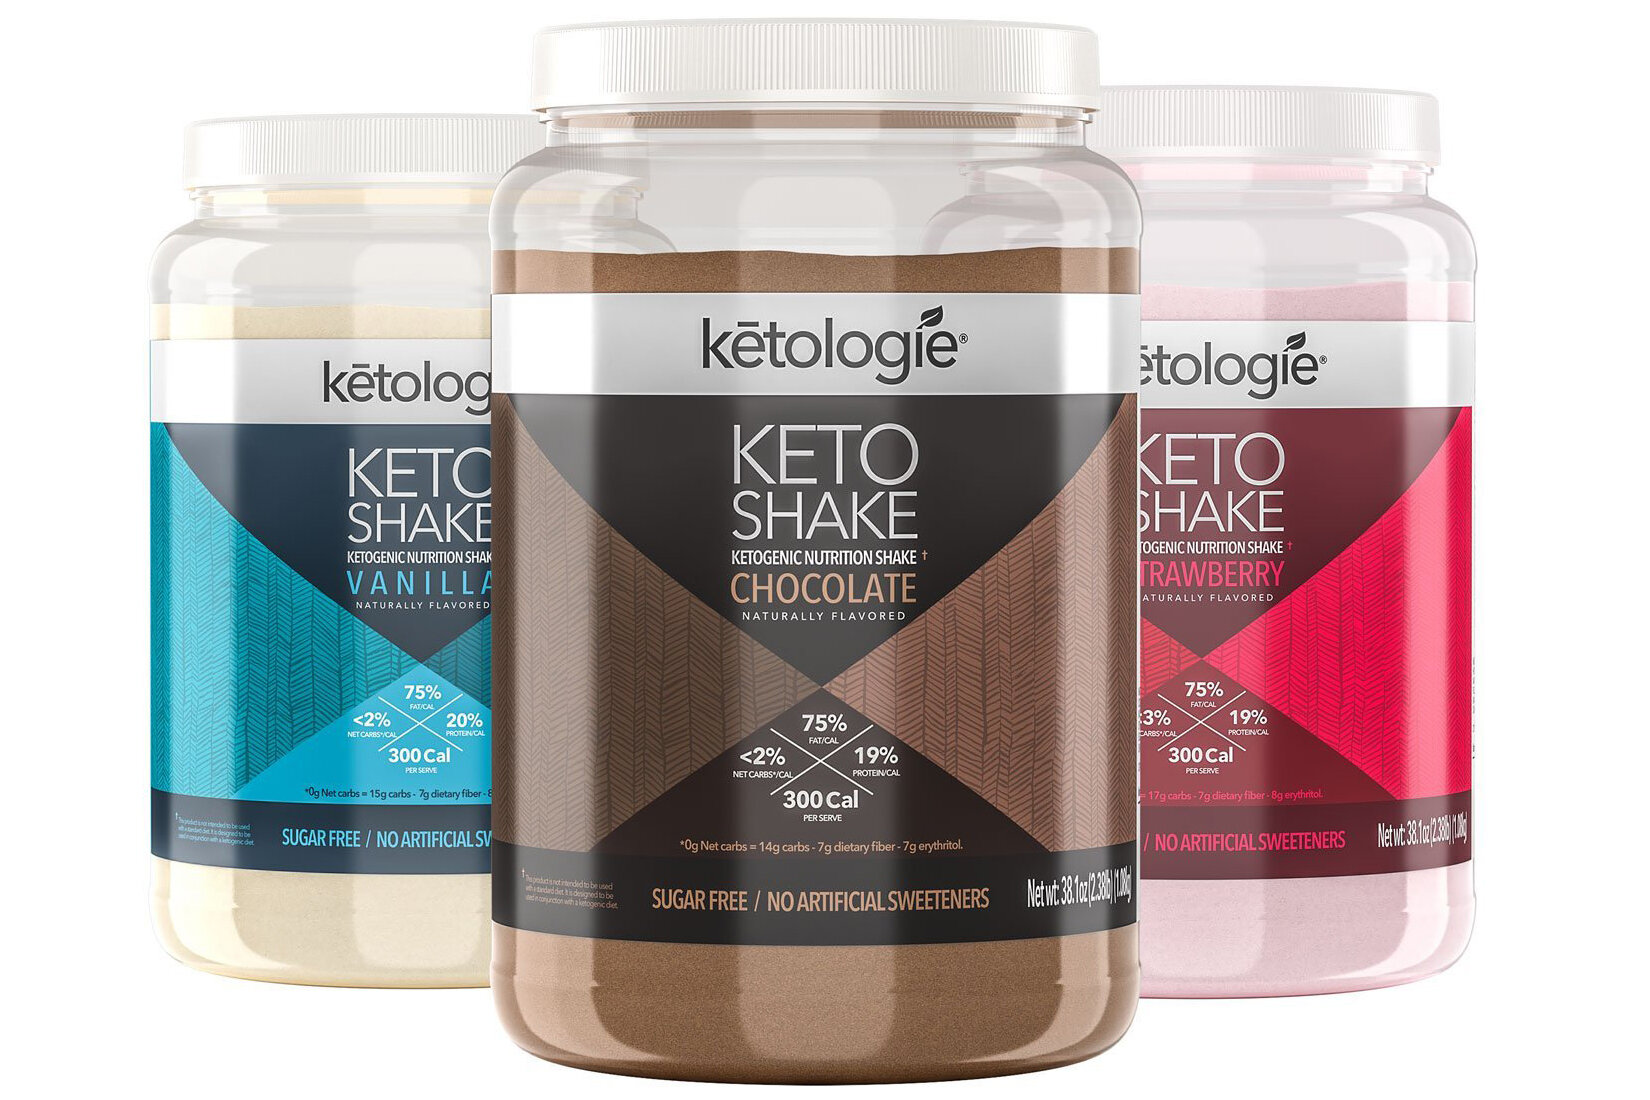 Are Muscle Milk Protein Shakes and Powders Keto Friendly? — Keto Picks